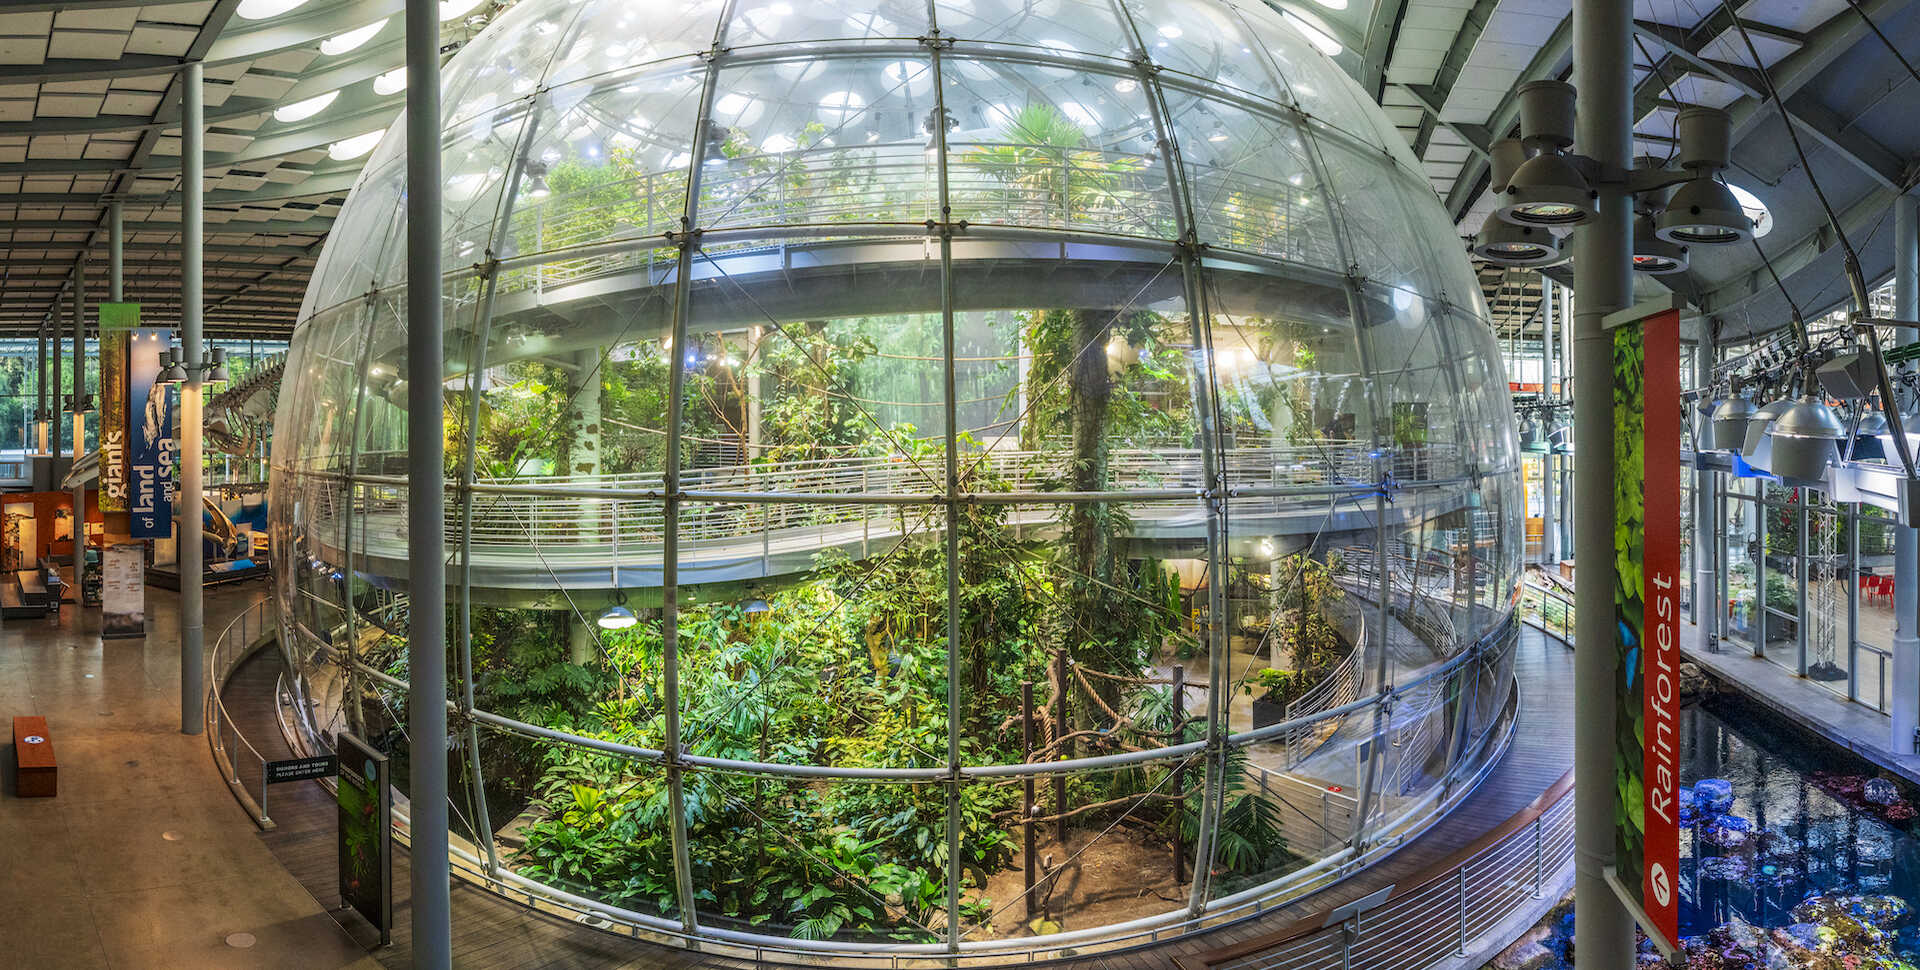 A big clear glass dome contains plants and metal walkways.